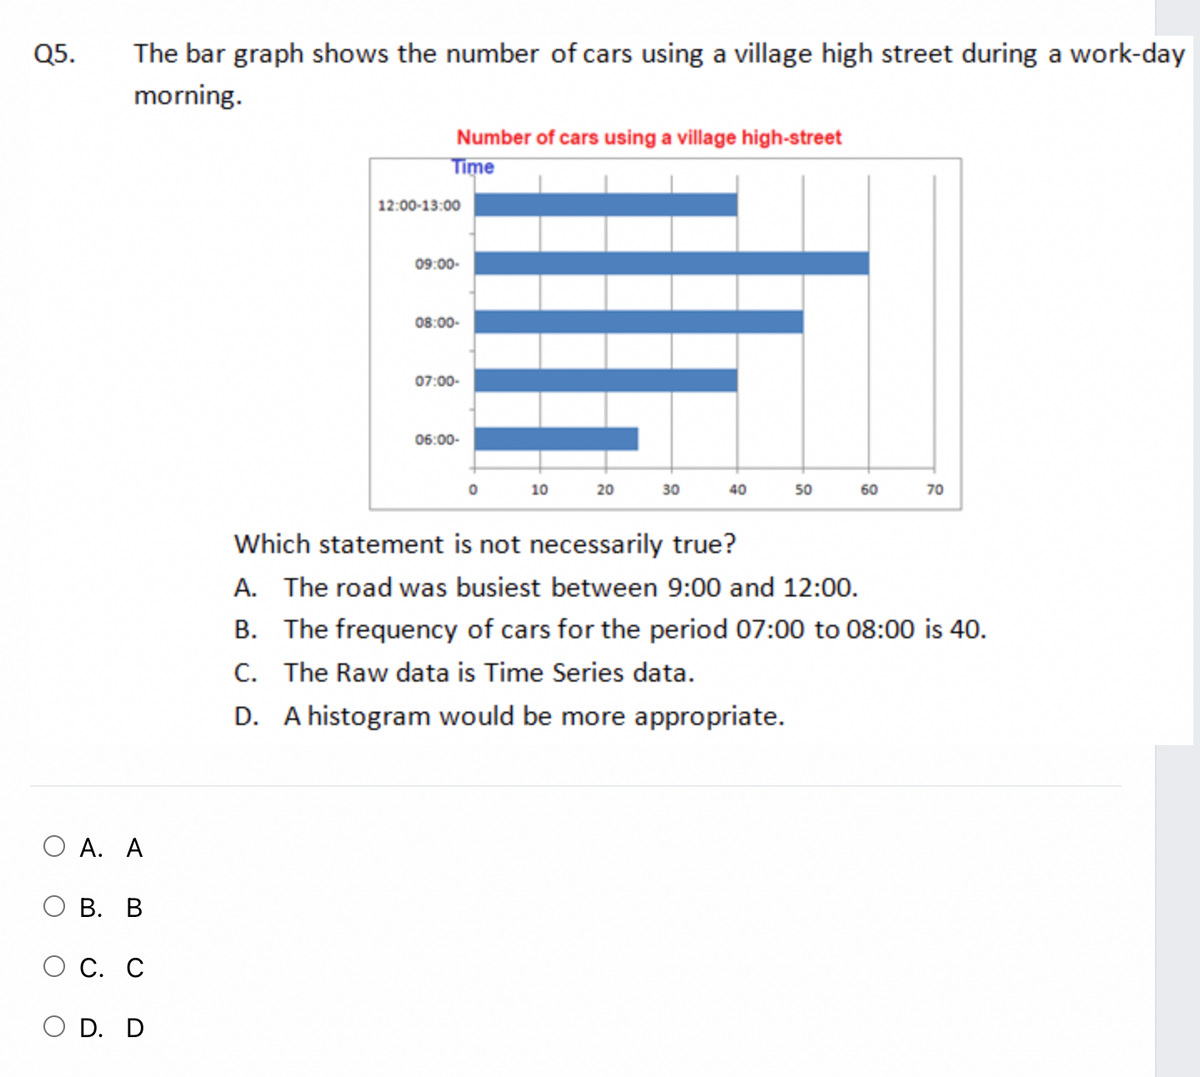 Q5.
The bar graph shows the number of cars using a village high street during a work-day
morning.
Number of cars using a village high-street
Time
12:00-13:00
09:00-
08:00-
07:00-
06:00-
10
20
30
40
50
60
70
Which statement is not necessarily true?
A. The road was busiest between 9:00 and 12:00.
B. The frequency of cars for the period 07:00 to 08:00 is 40.
C. The Raw data is Time Series data.
D. A histogram would be more appropriate.
O A. A
ОВ. В
С. С
O D. D
